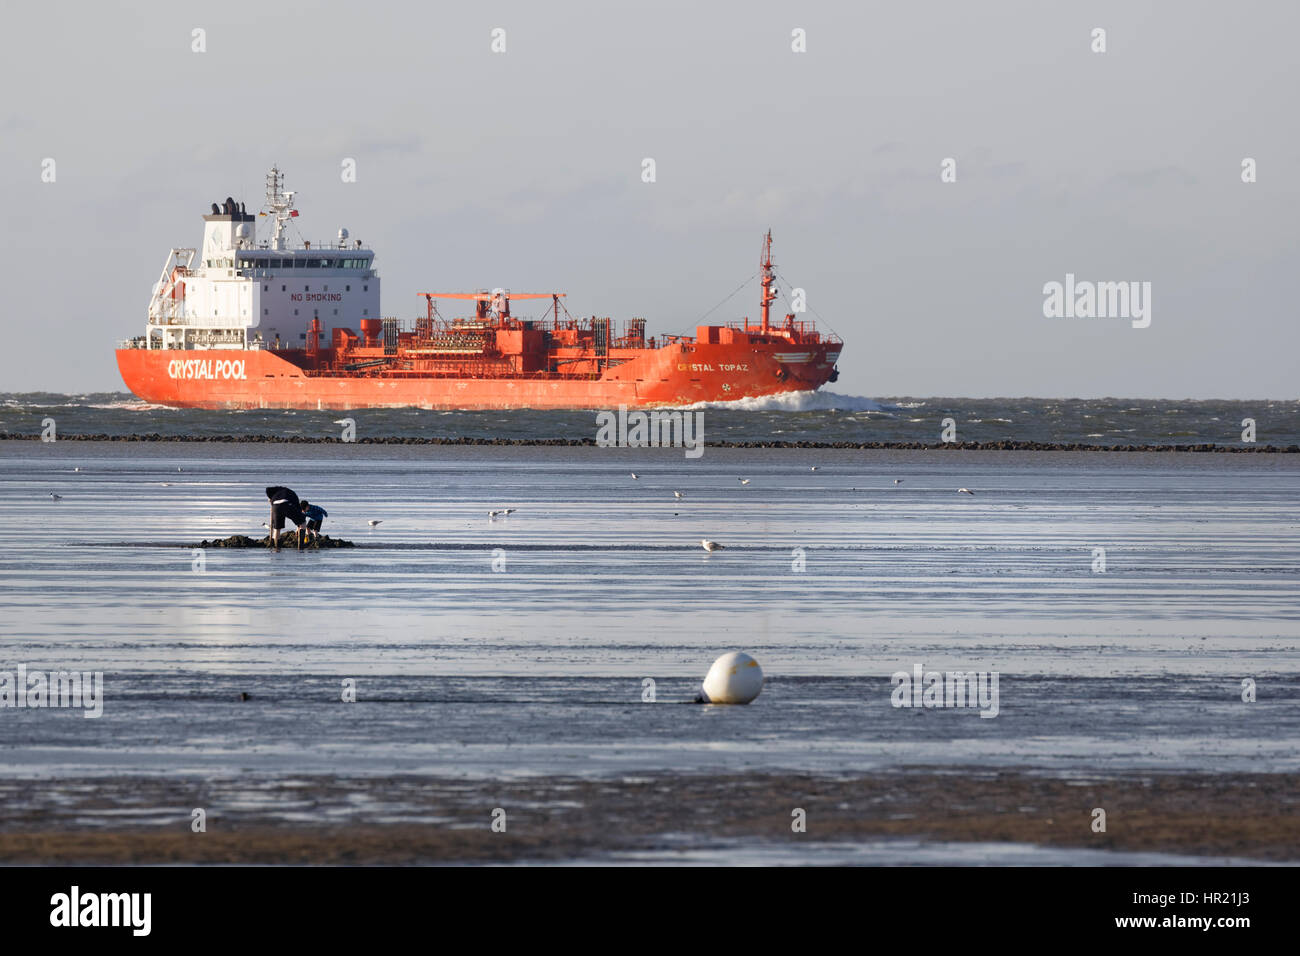 Freight ship in the Wadden Sea, Cuxhaven, Lower Saxony, Germany, Europe Stock Photo